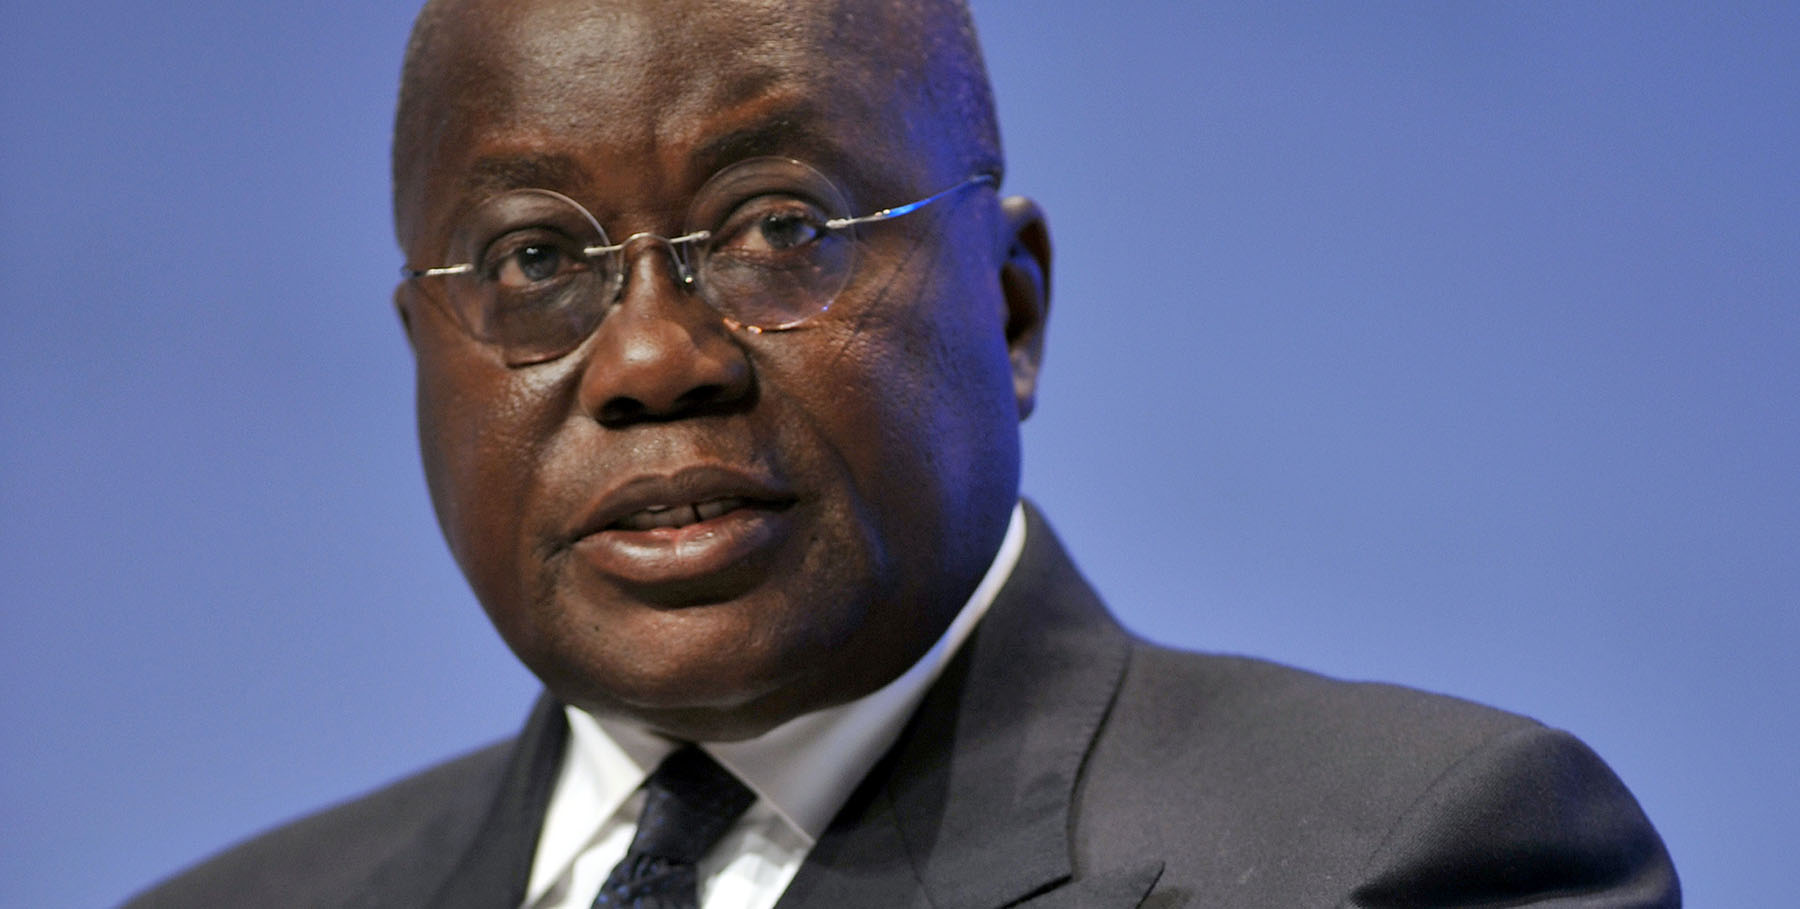 Akufo-Addo accepted as flagbearer of NPP for Election 2020.